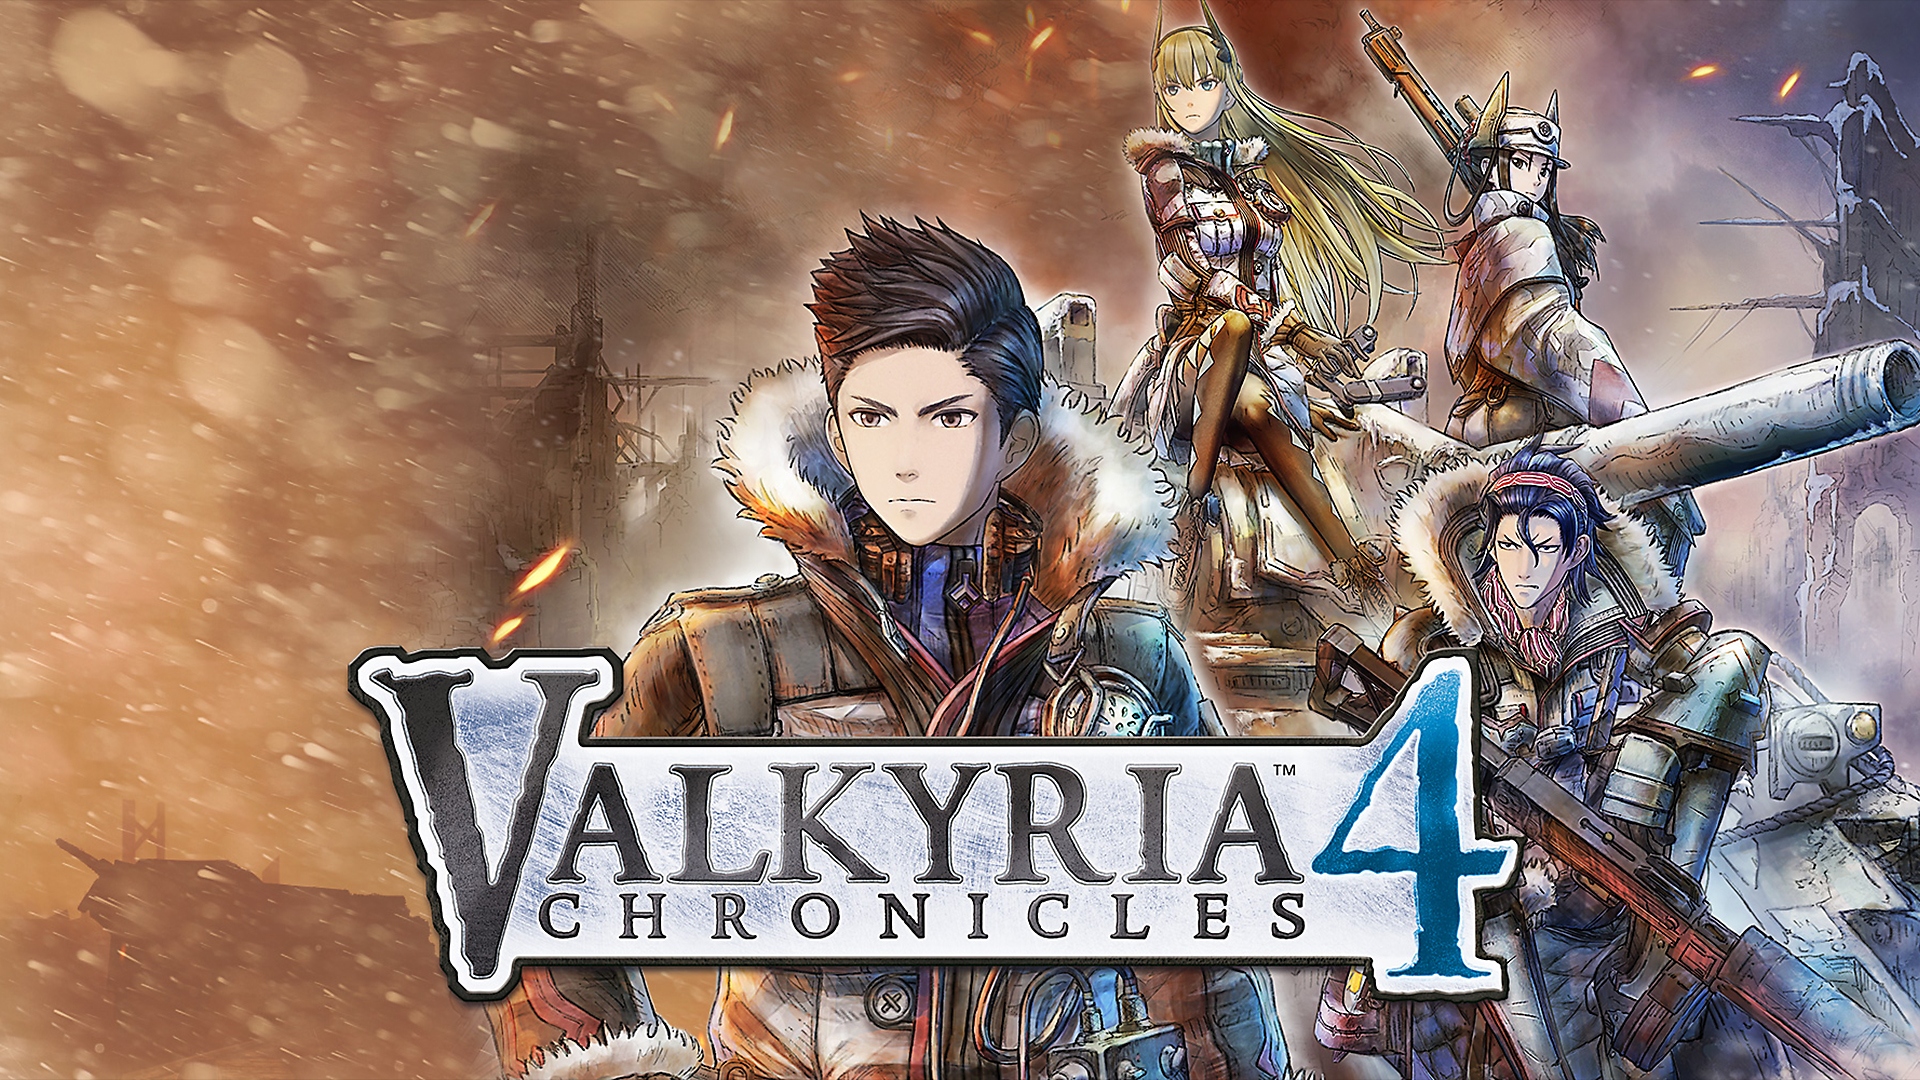 Valkyria Chronicles 4 - Prologue | PS4